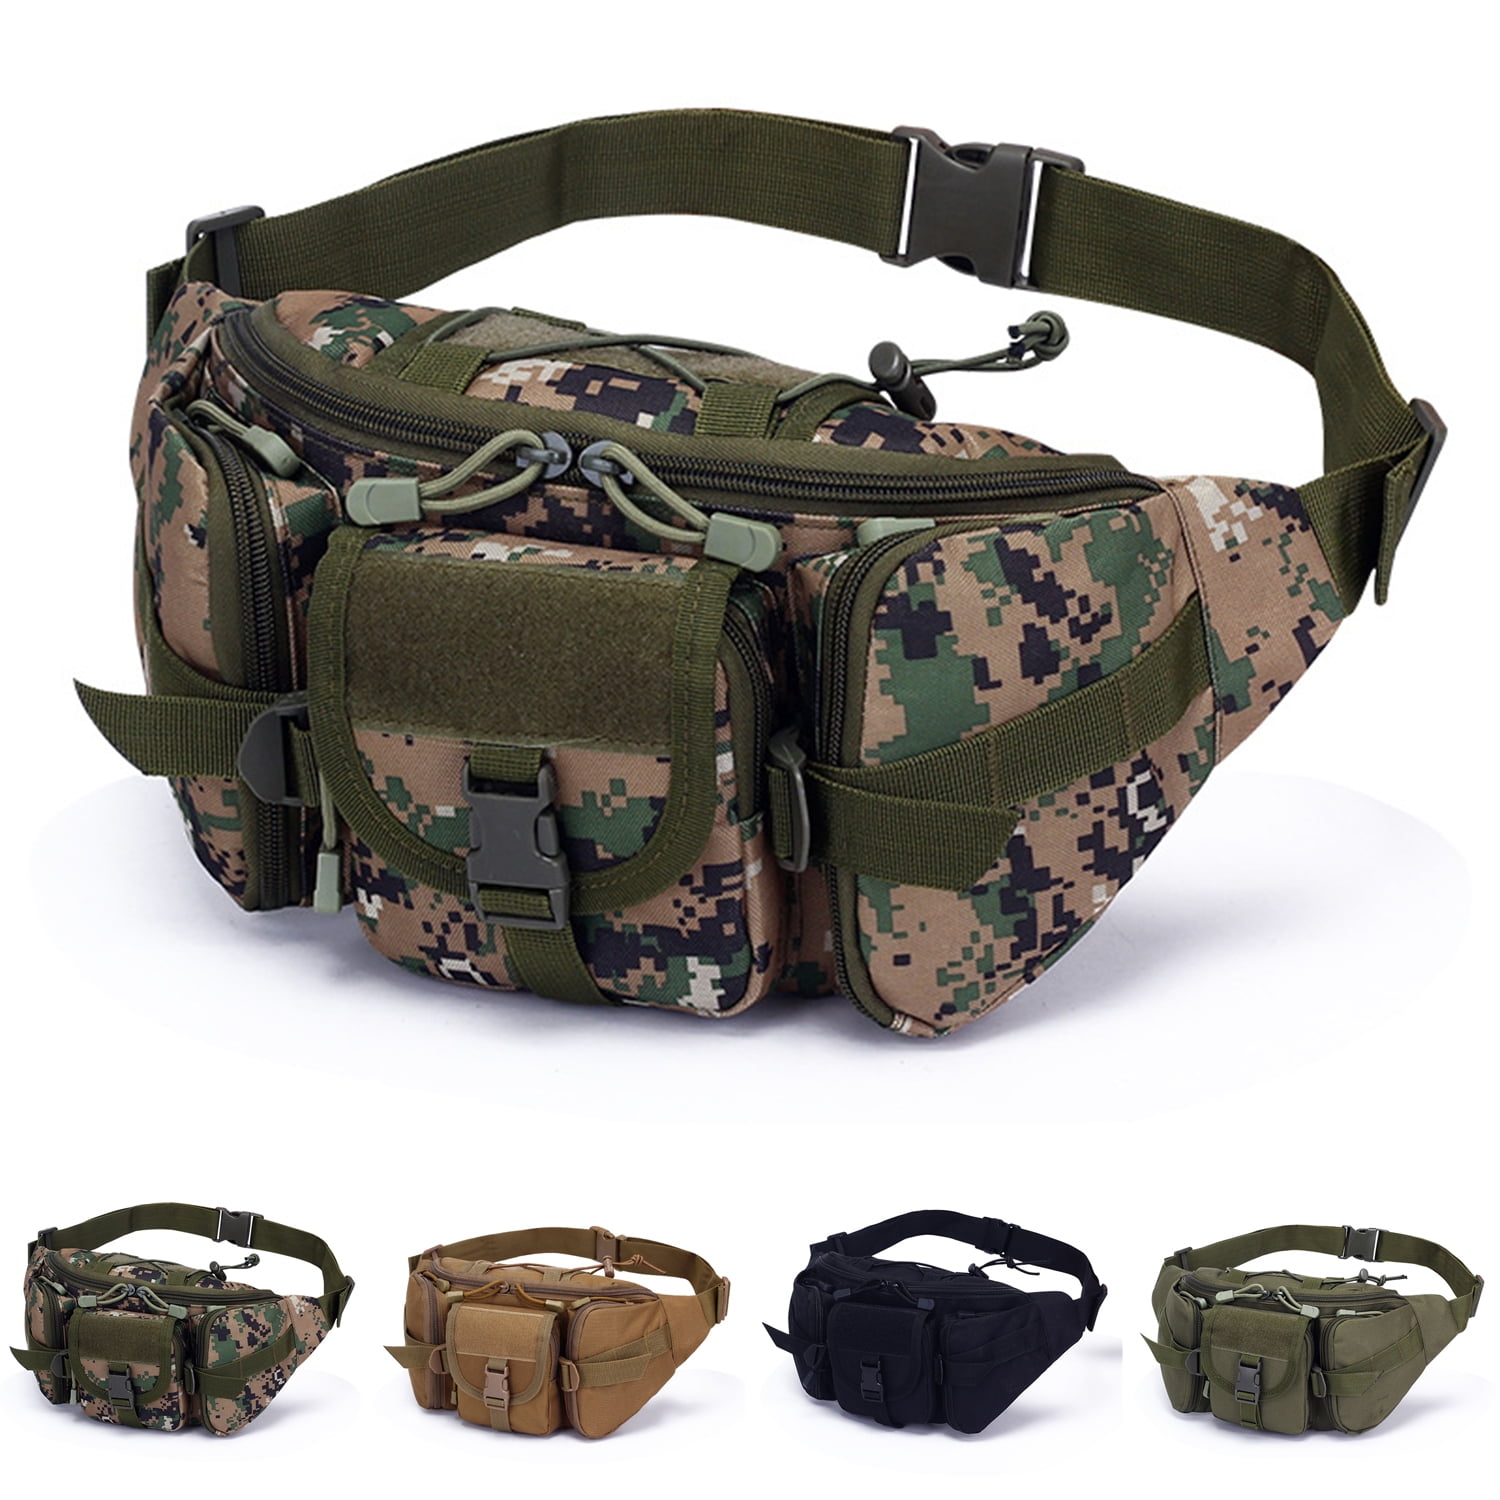 Waterproof Tactical Fanny Pack Outdoor Army Hiking Nylon Waist